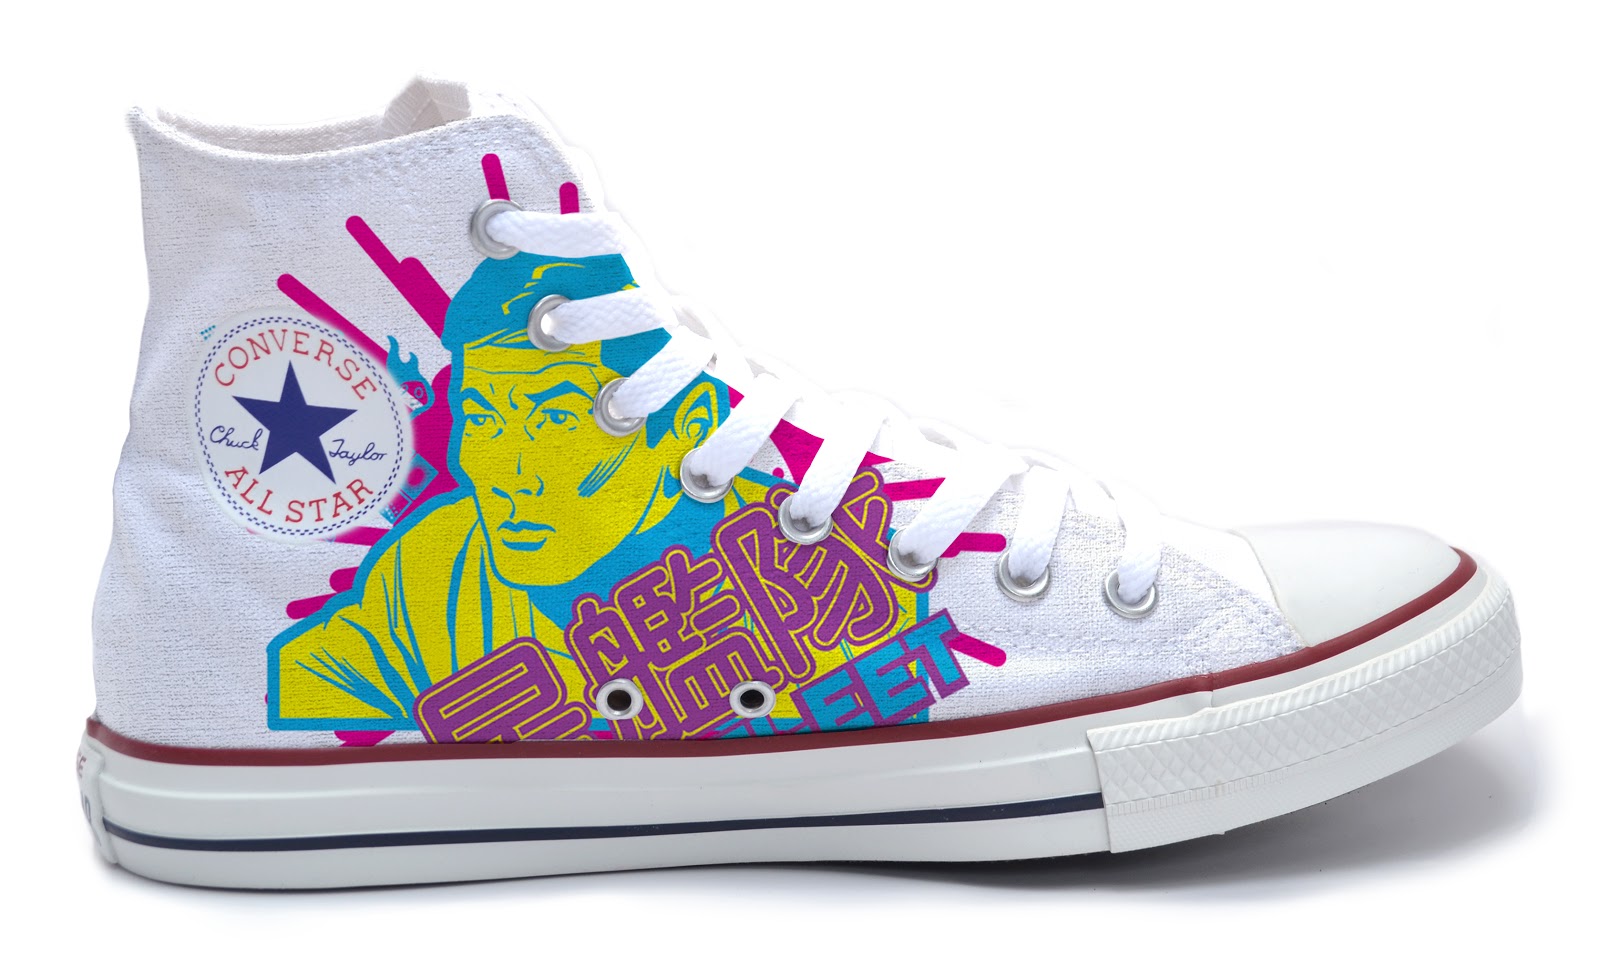 The Trek Collective: Get Star Treking, with the latest Star Trek shoes